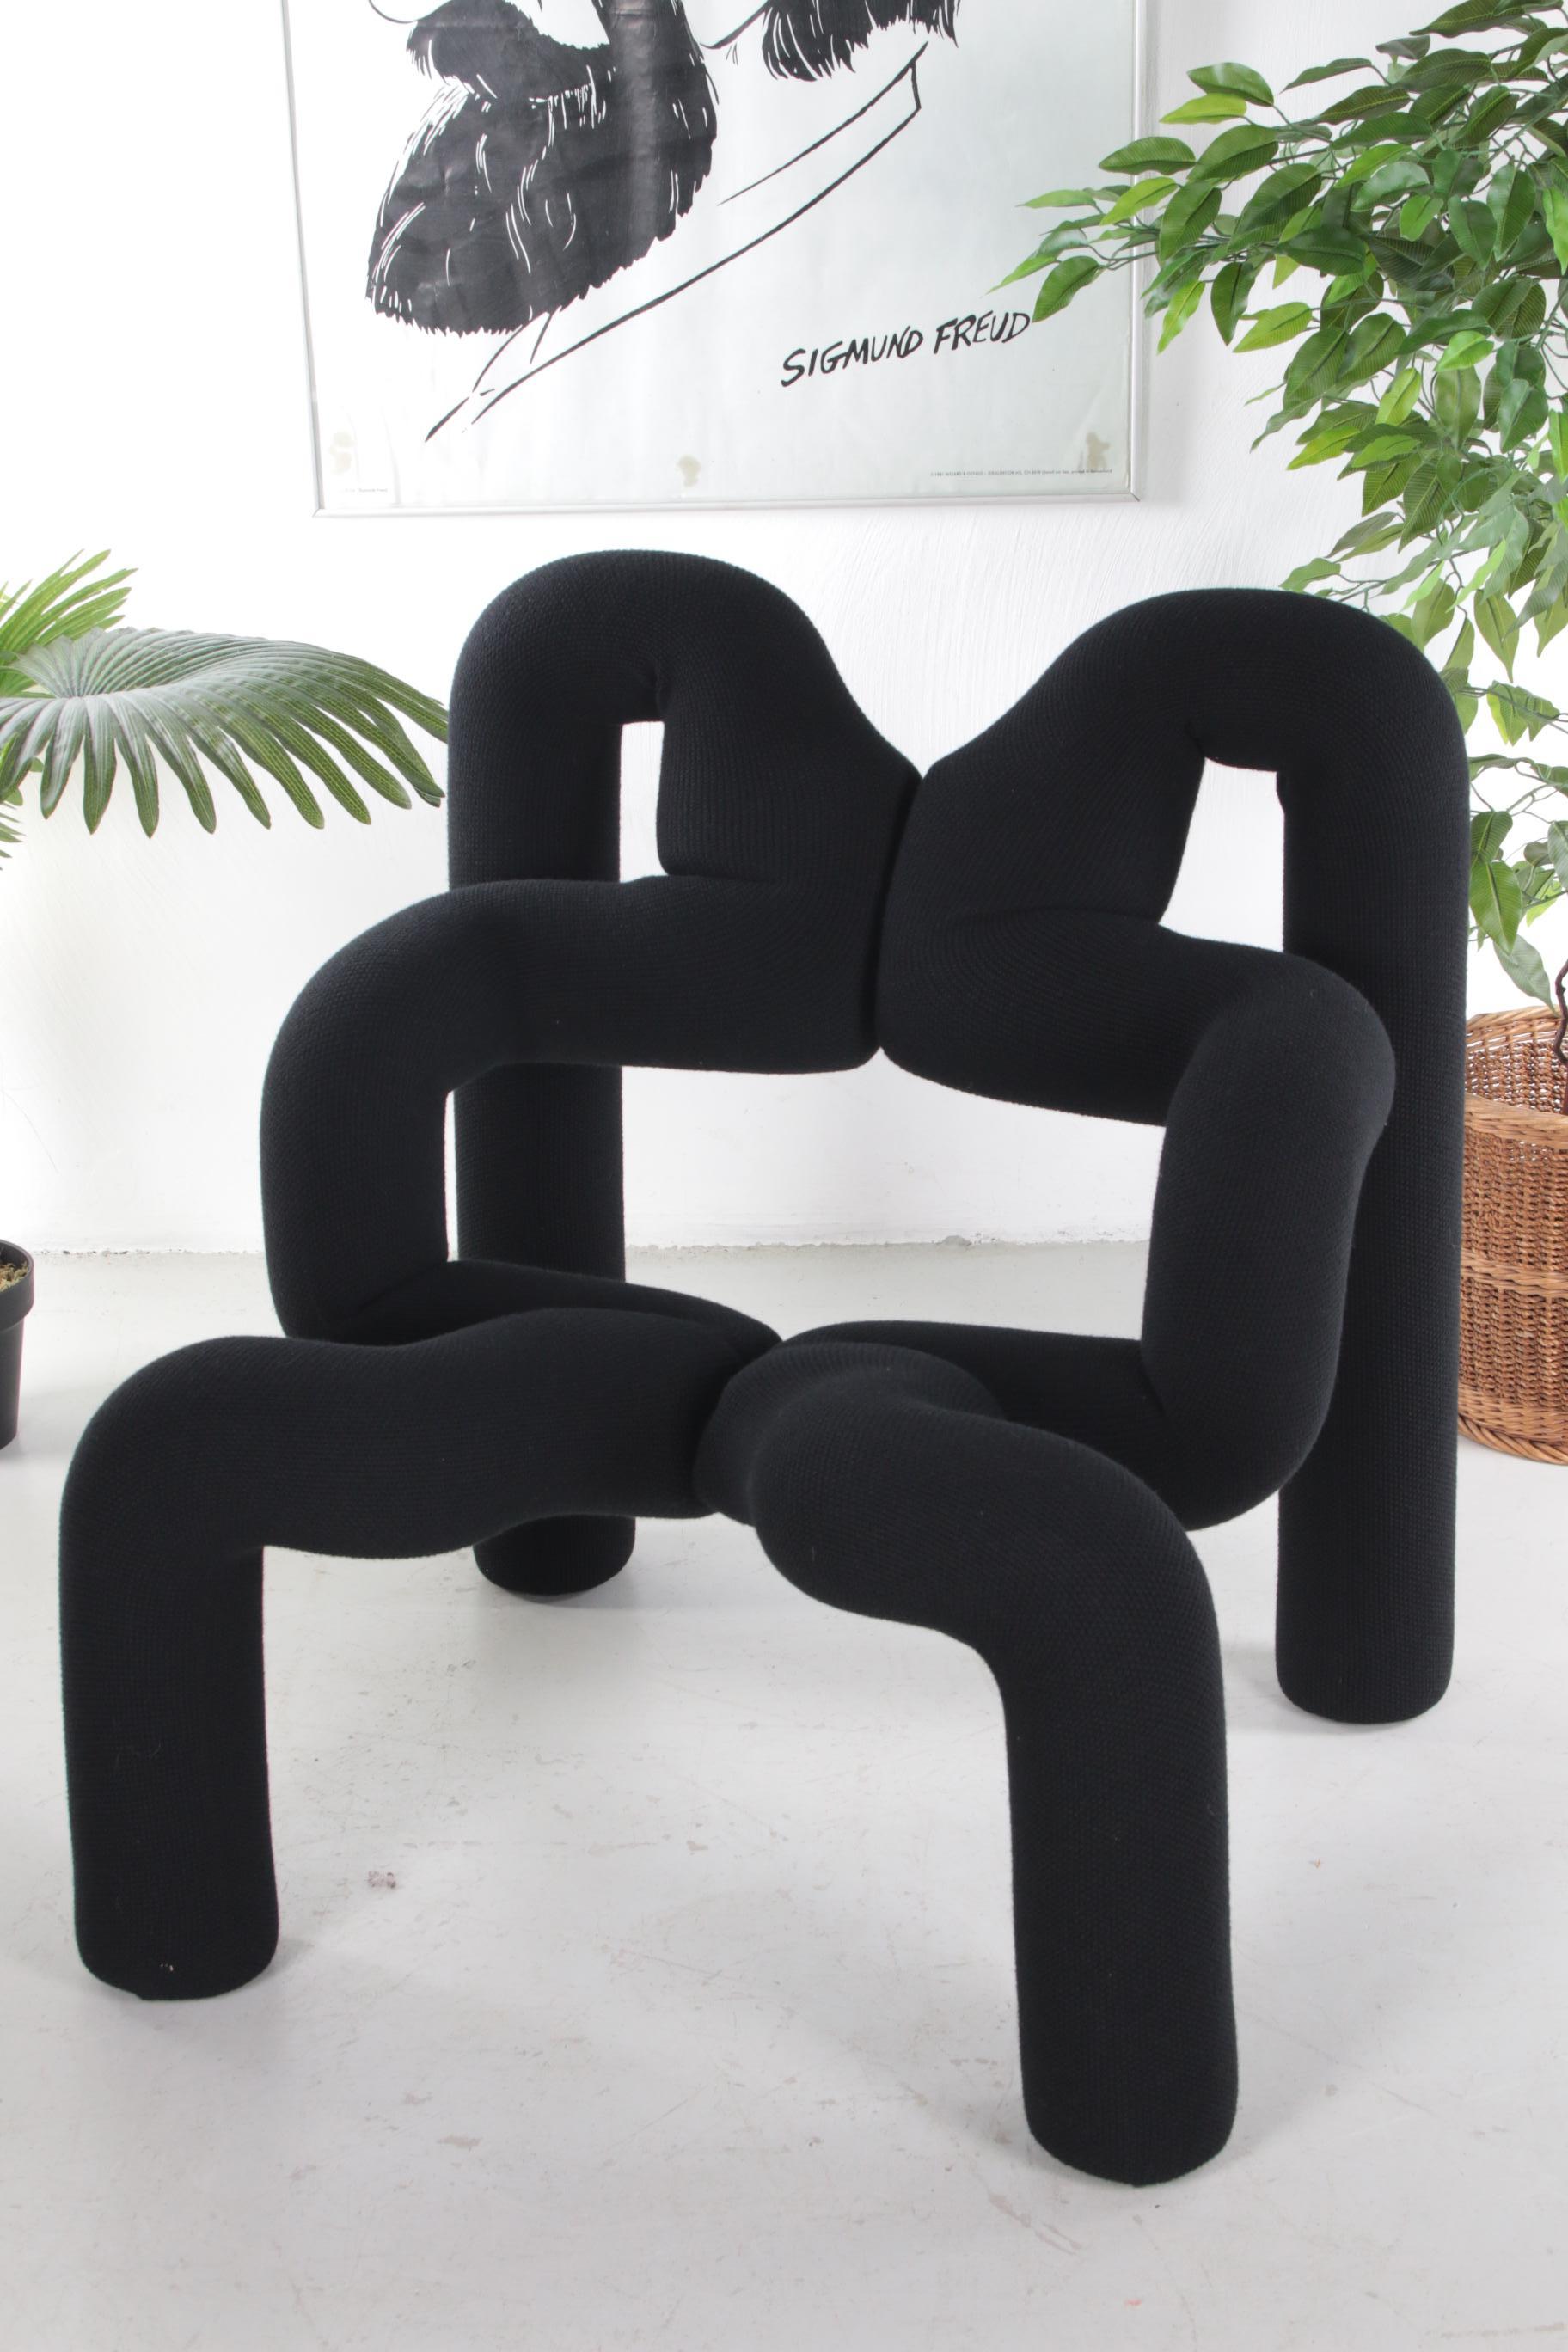 Vintage design chair Terje Ekstrøm Ekstrem lounge armchair Stokke Varier


This special funky lounge chair comes all the way from Norway, and is better known as the Ekstrem Chair. It is an abstract, cool and sleek design by Terje Ekstrom for